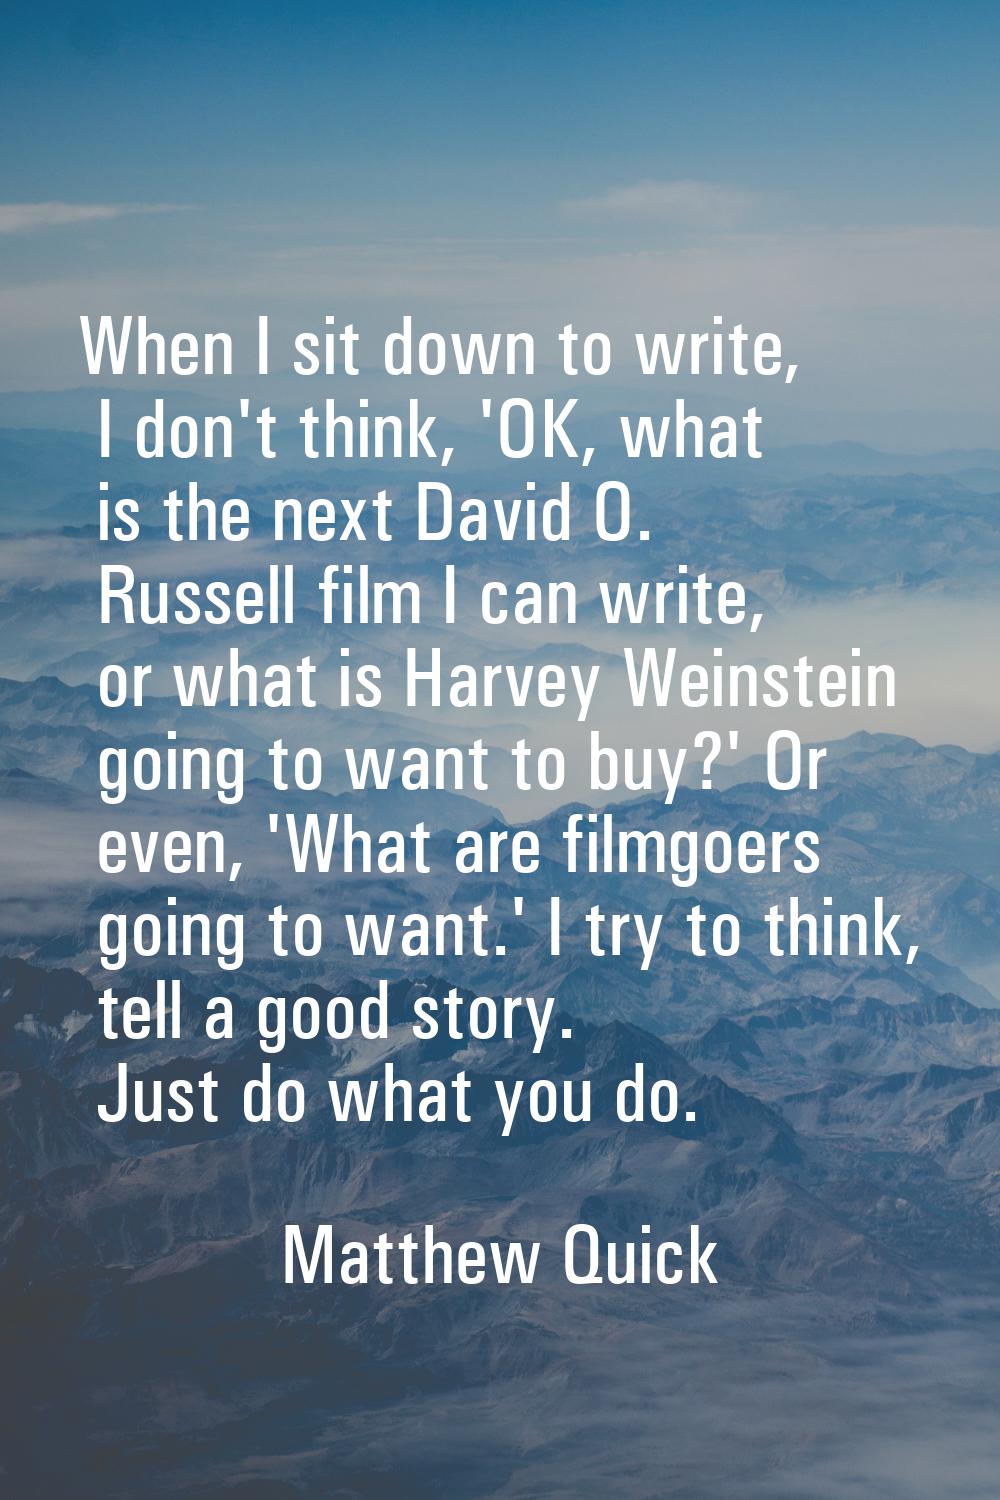 When I sit down to write, I don't think, 'OK, what is the next David O. Russell film I can write, o